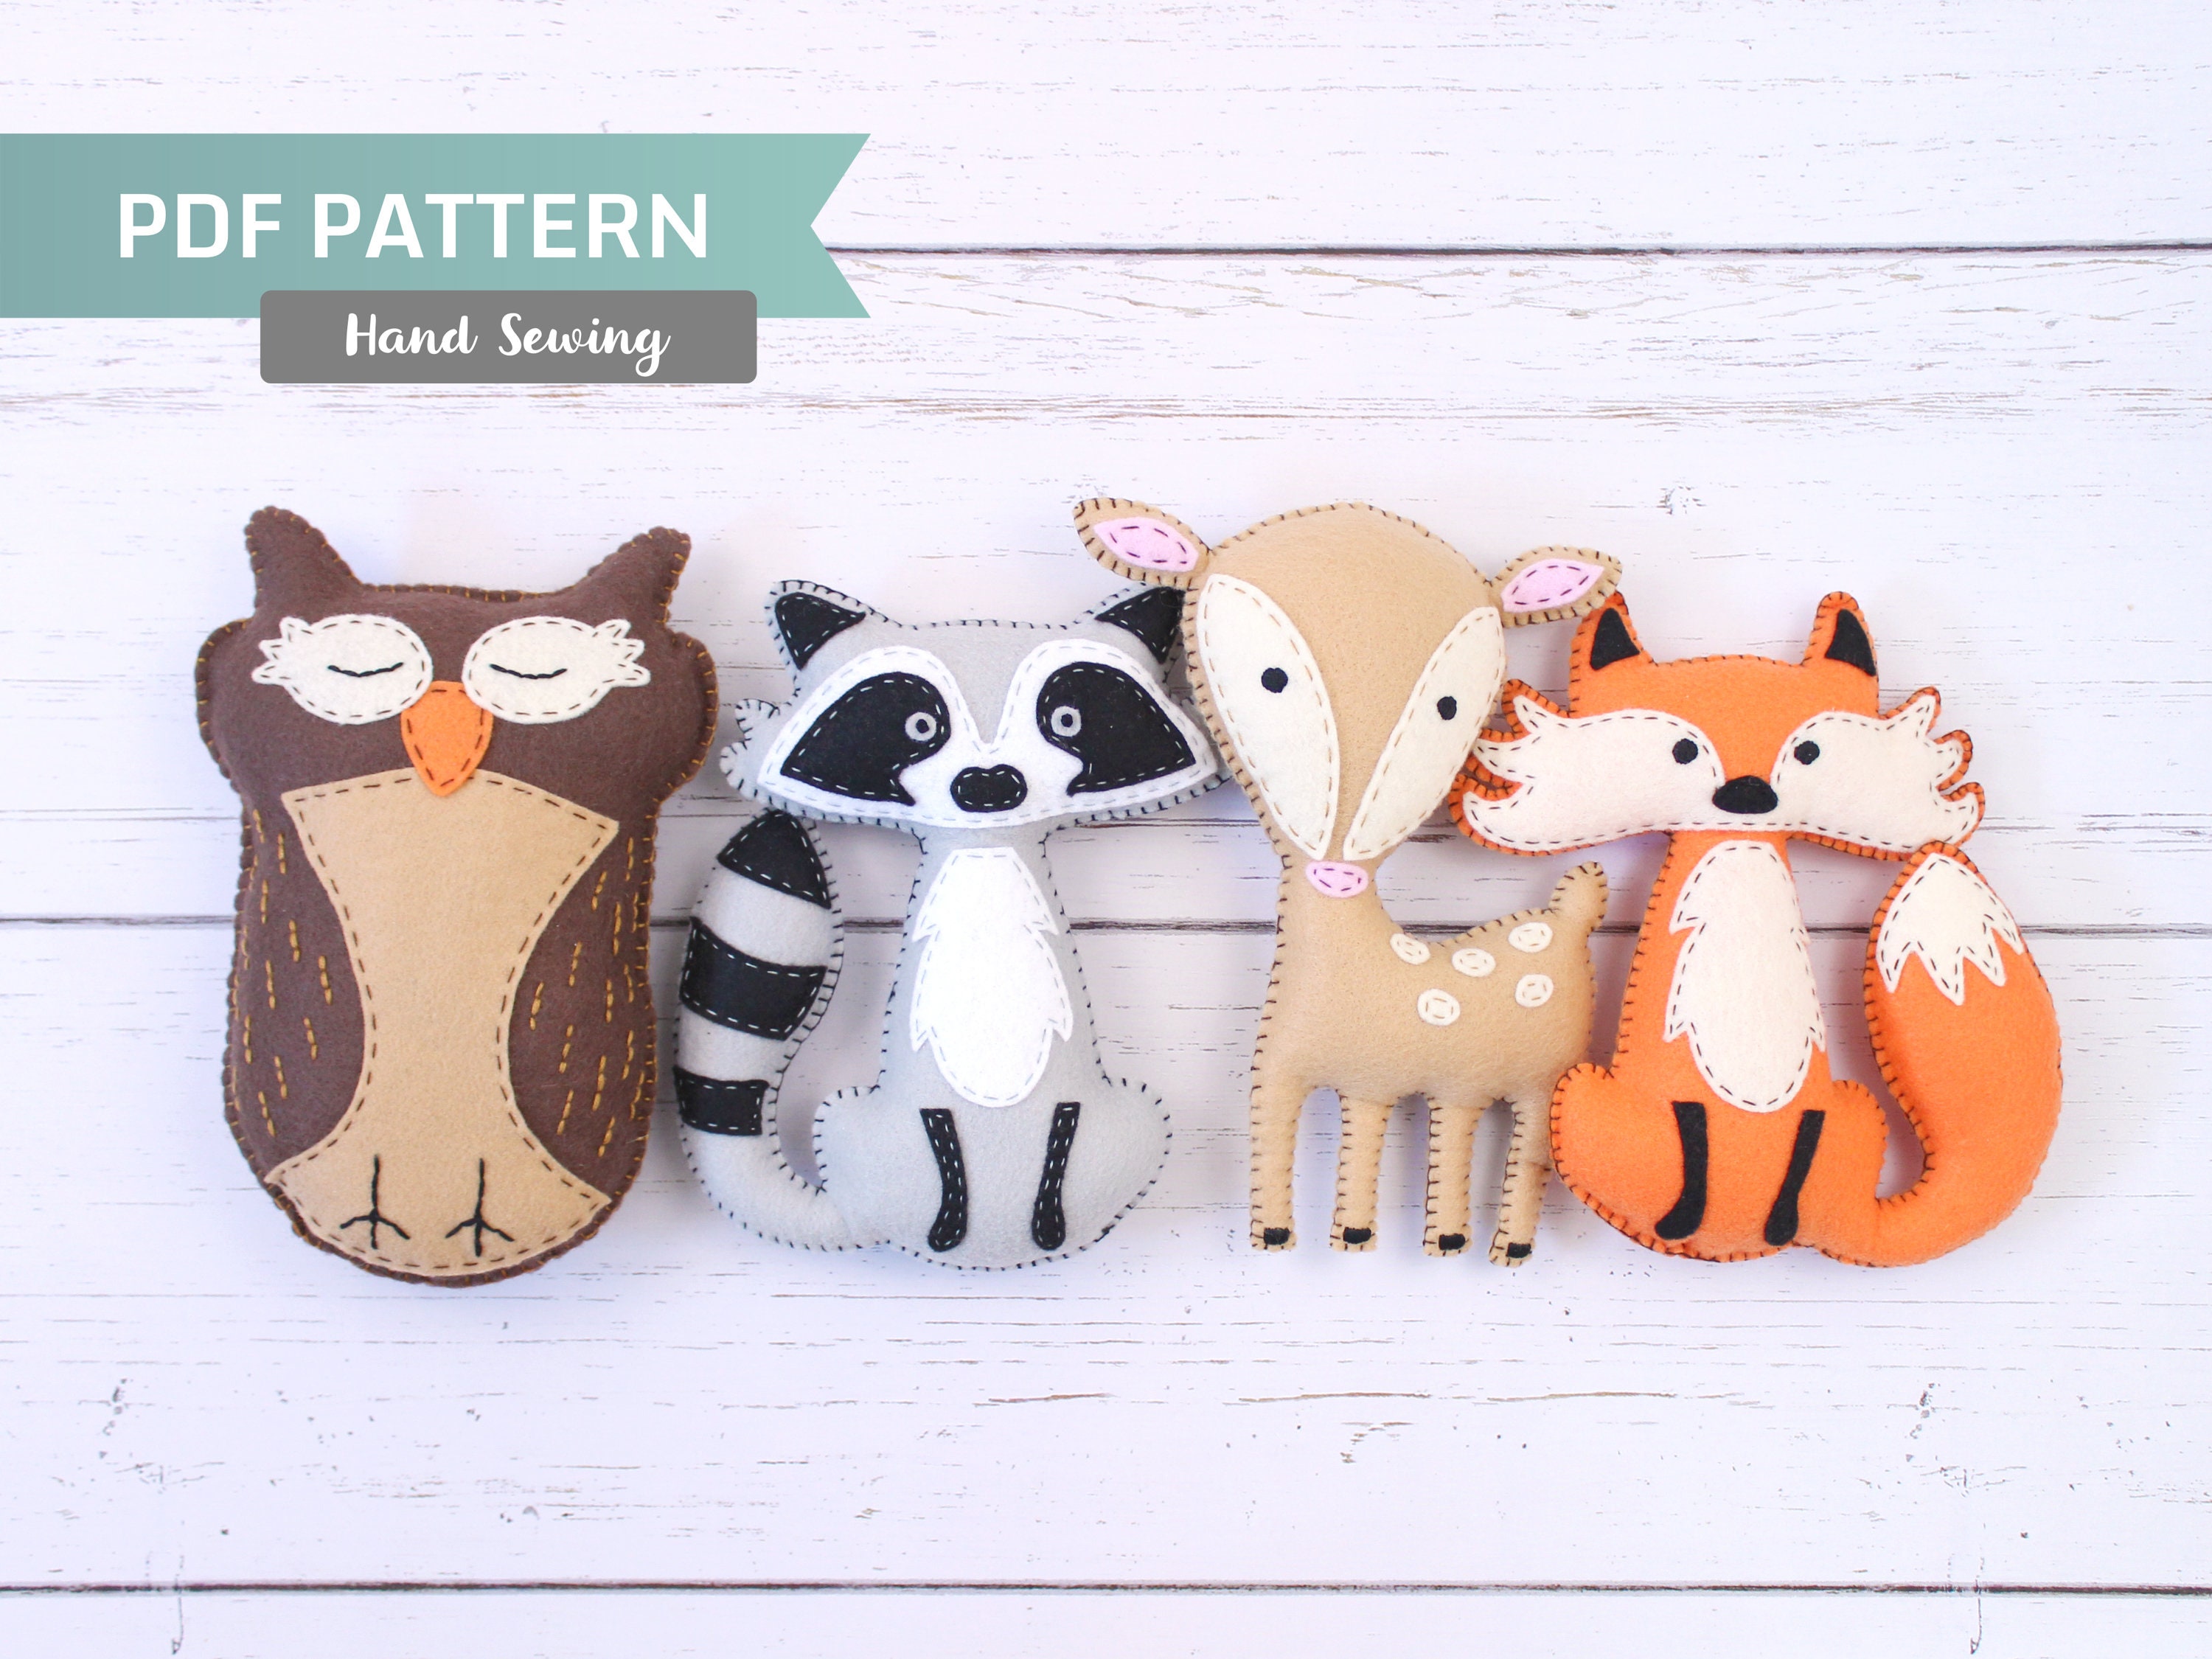 Design & Craft Your Own Stuffed Animals with Sewing Patterns